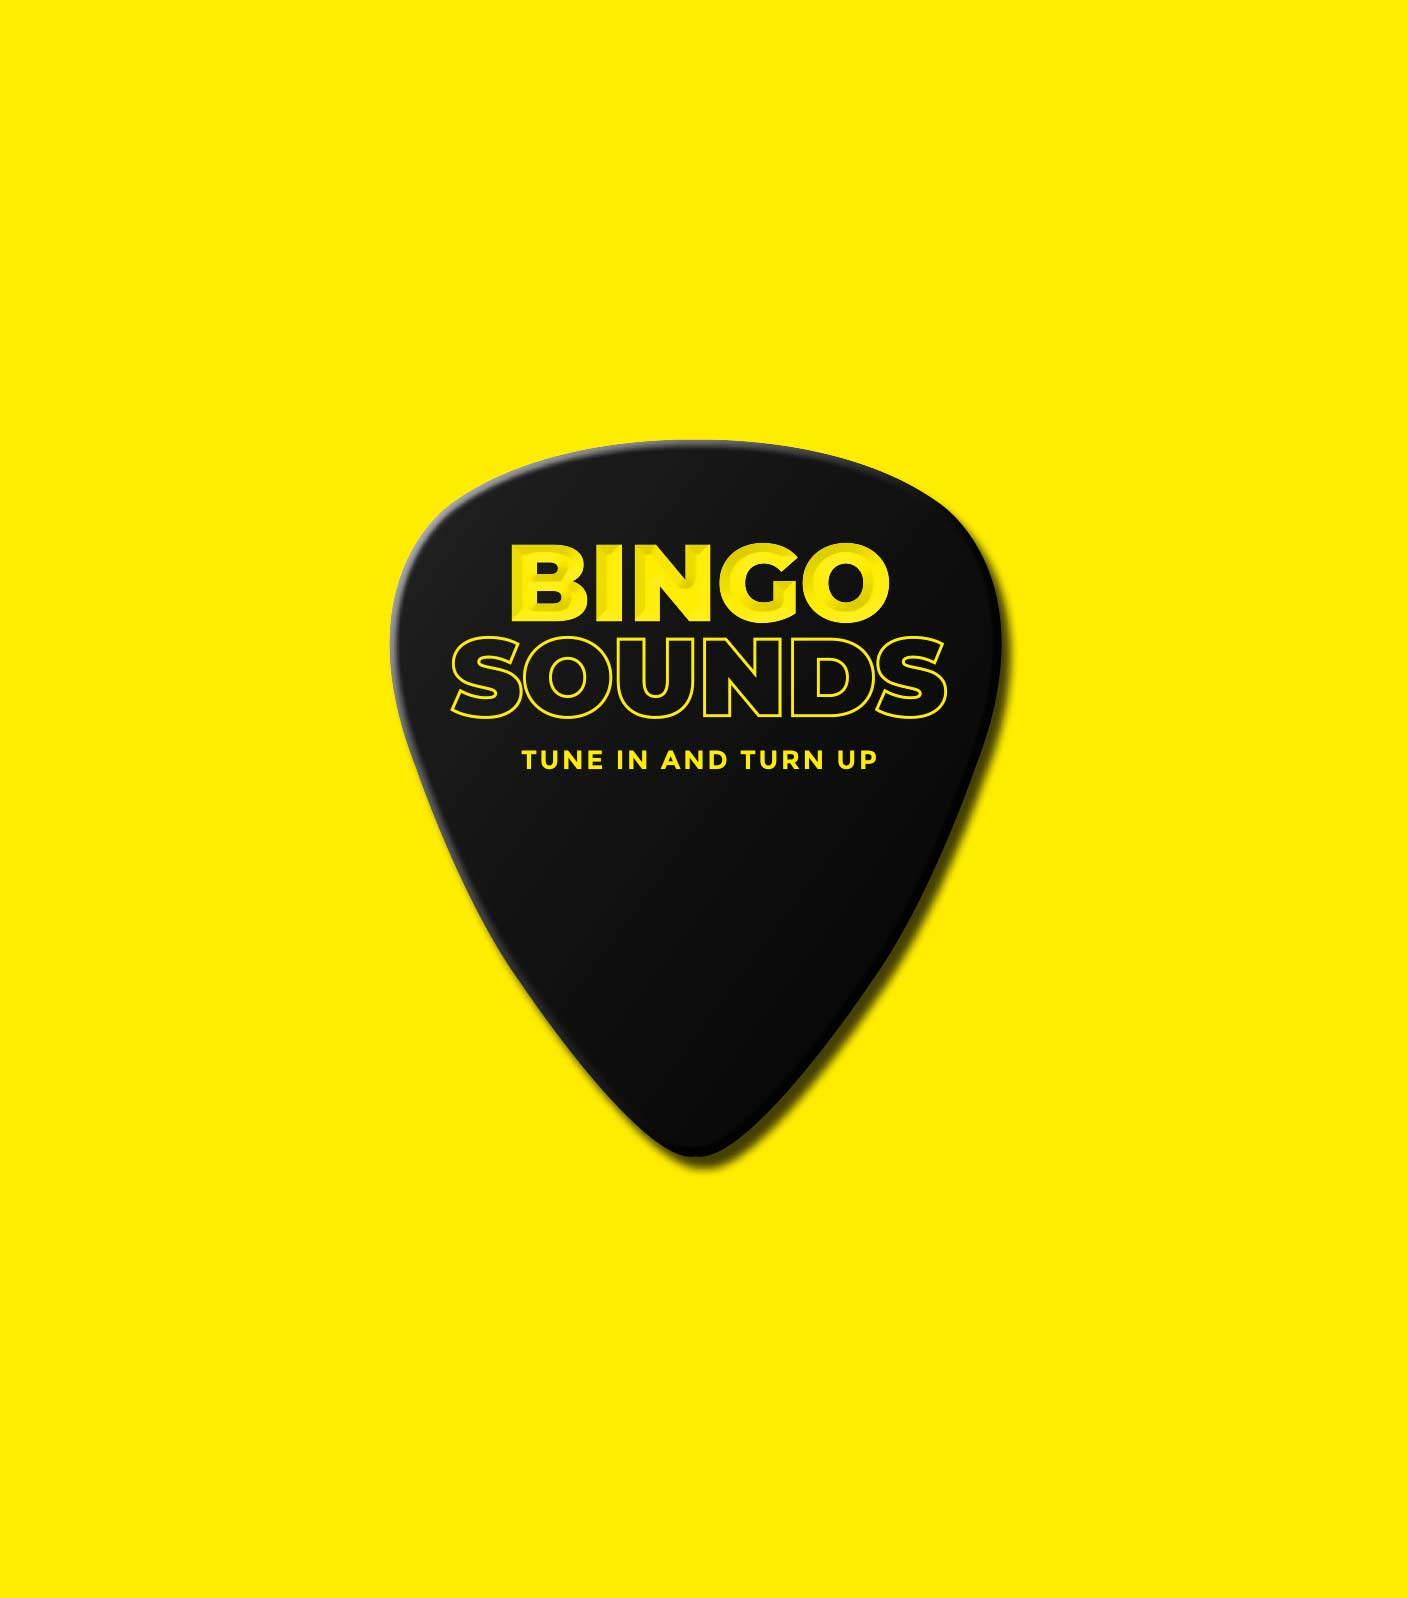 A black guitar plectrum with the bingo sounds logo in yellow lying on a yellow background.